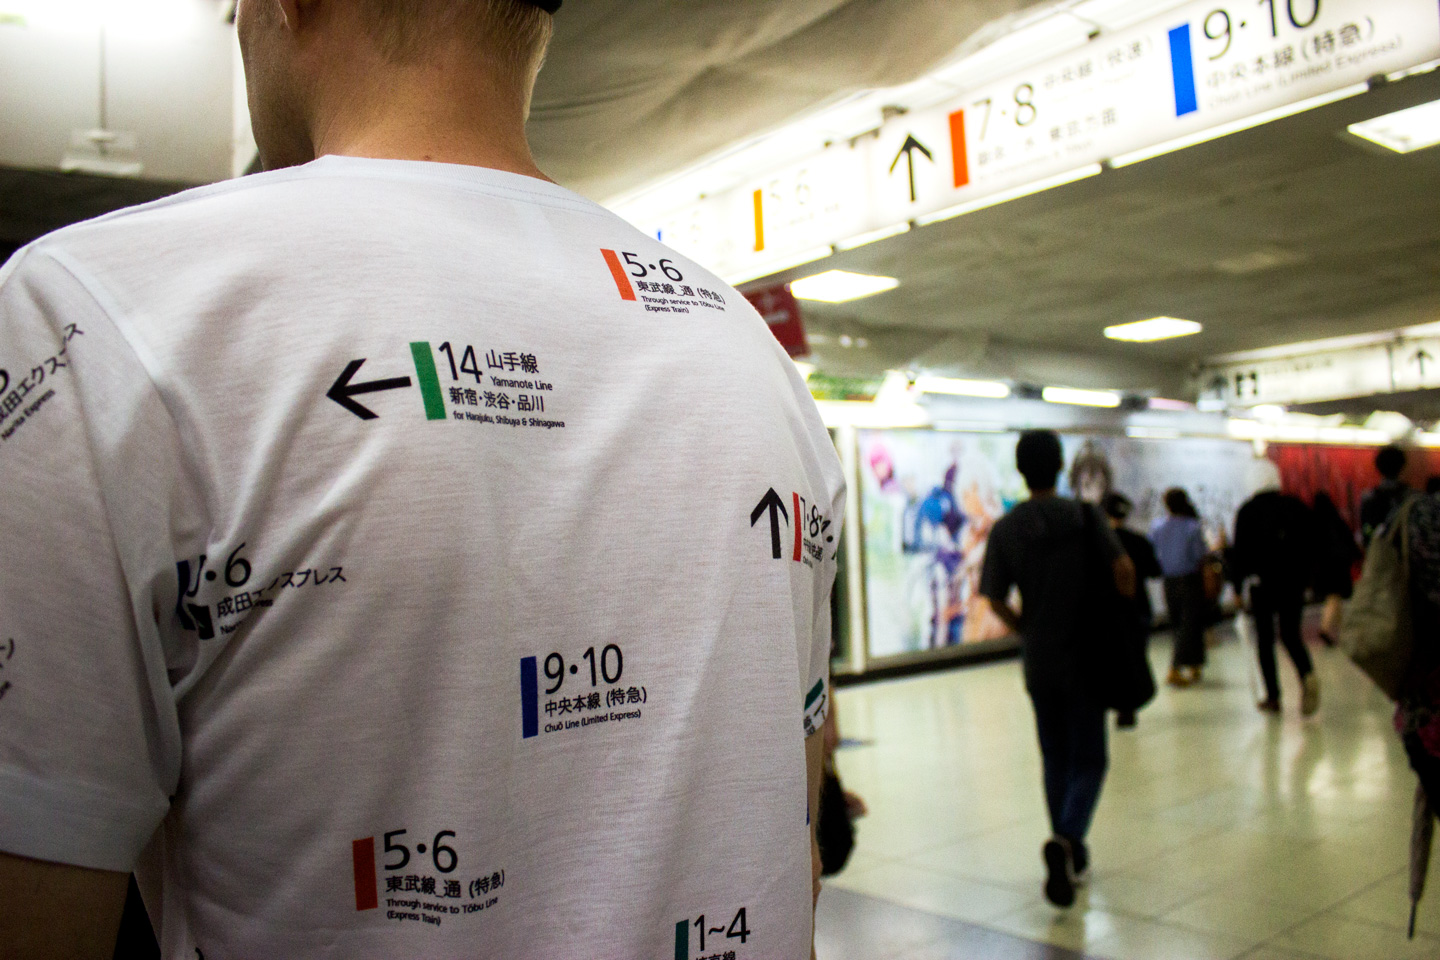 Tokyo Signs - Products inspired by the streets of Tokyo - Shinujuku Station Signage T-shirt